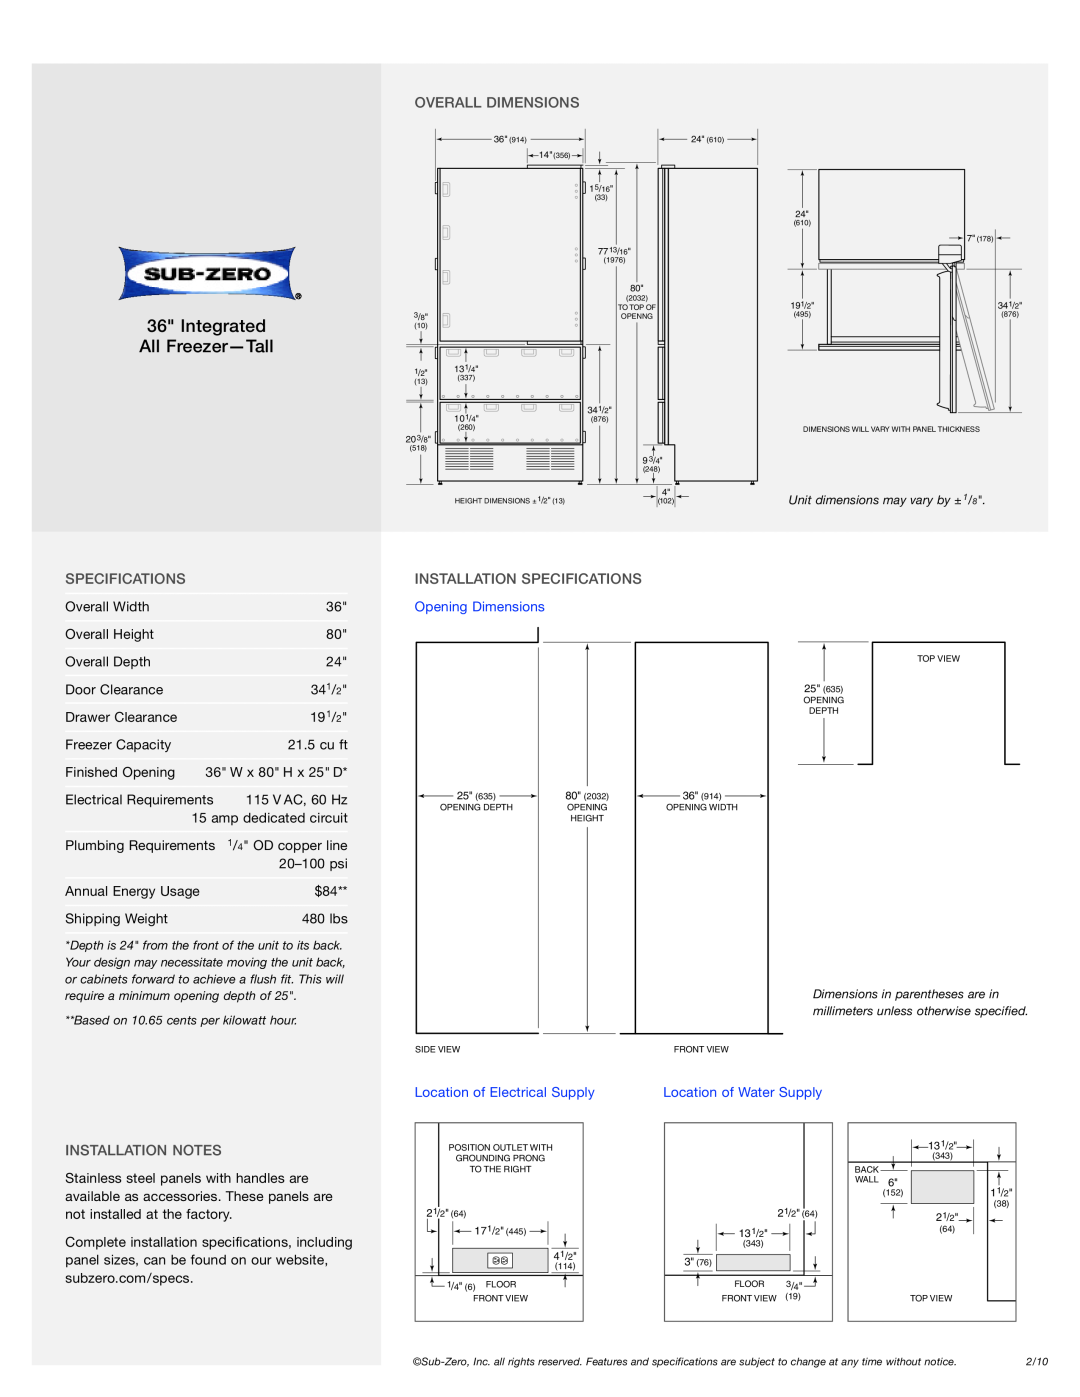 Sub-Zero 736TFI manual Overall Dimensions, Installation Specifications, Installation Notes, Integrated All Freezer-Tall 